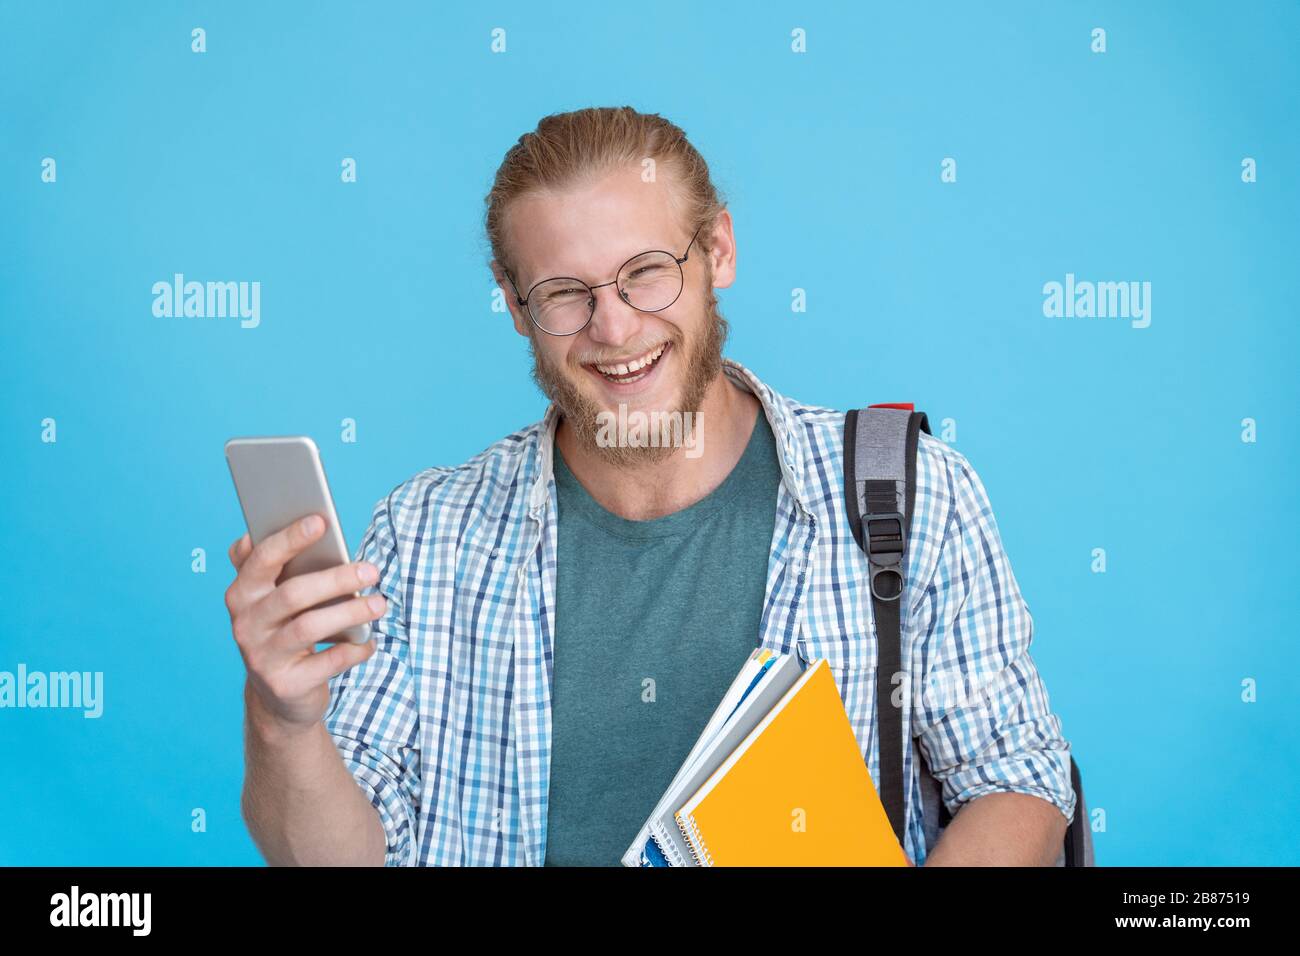 Cheerful man student laughing hold phone isolated on blue background. Stock Photo